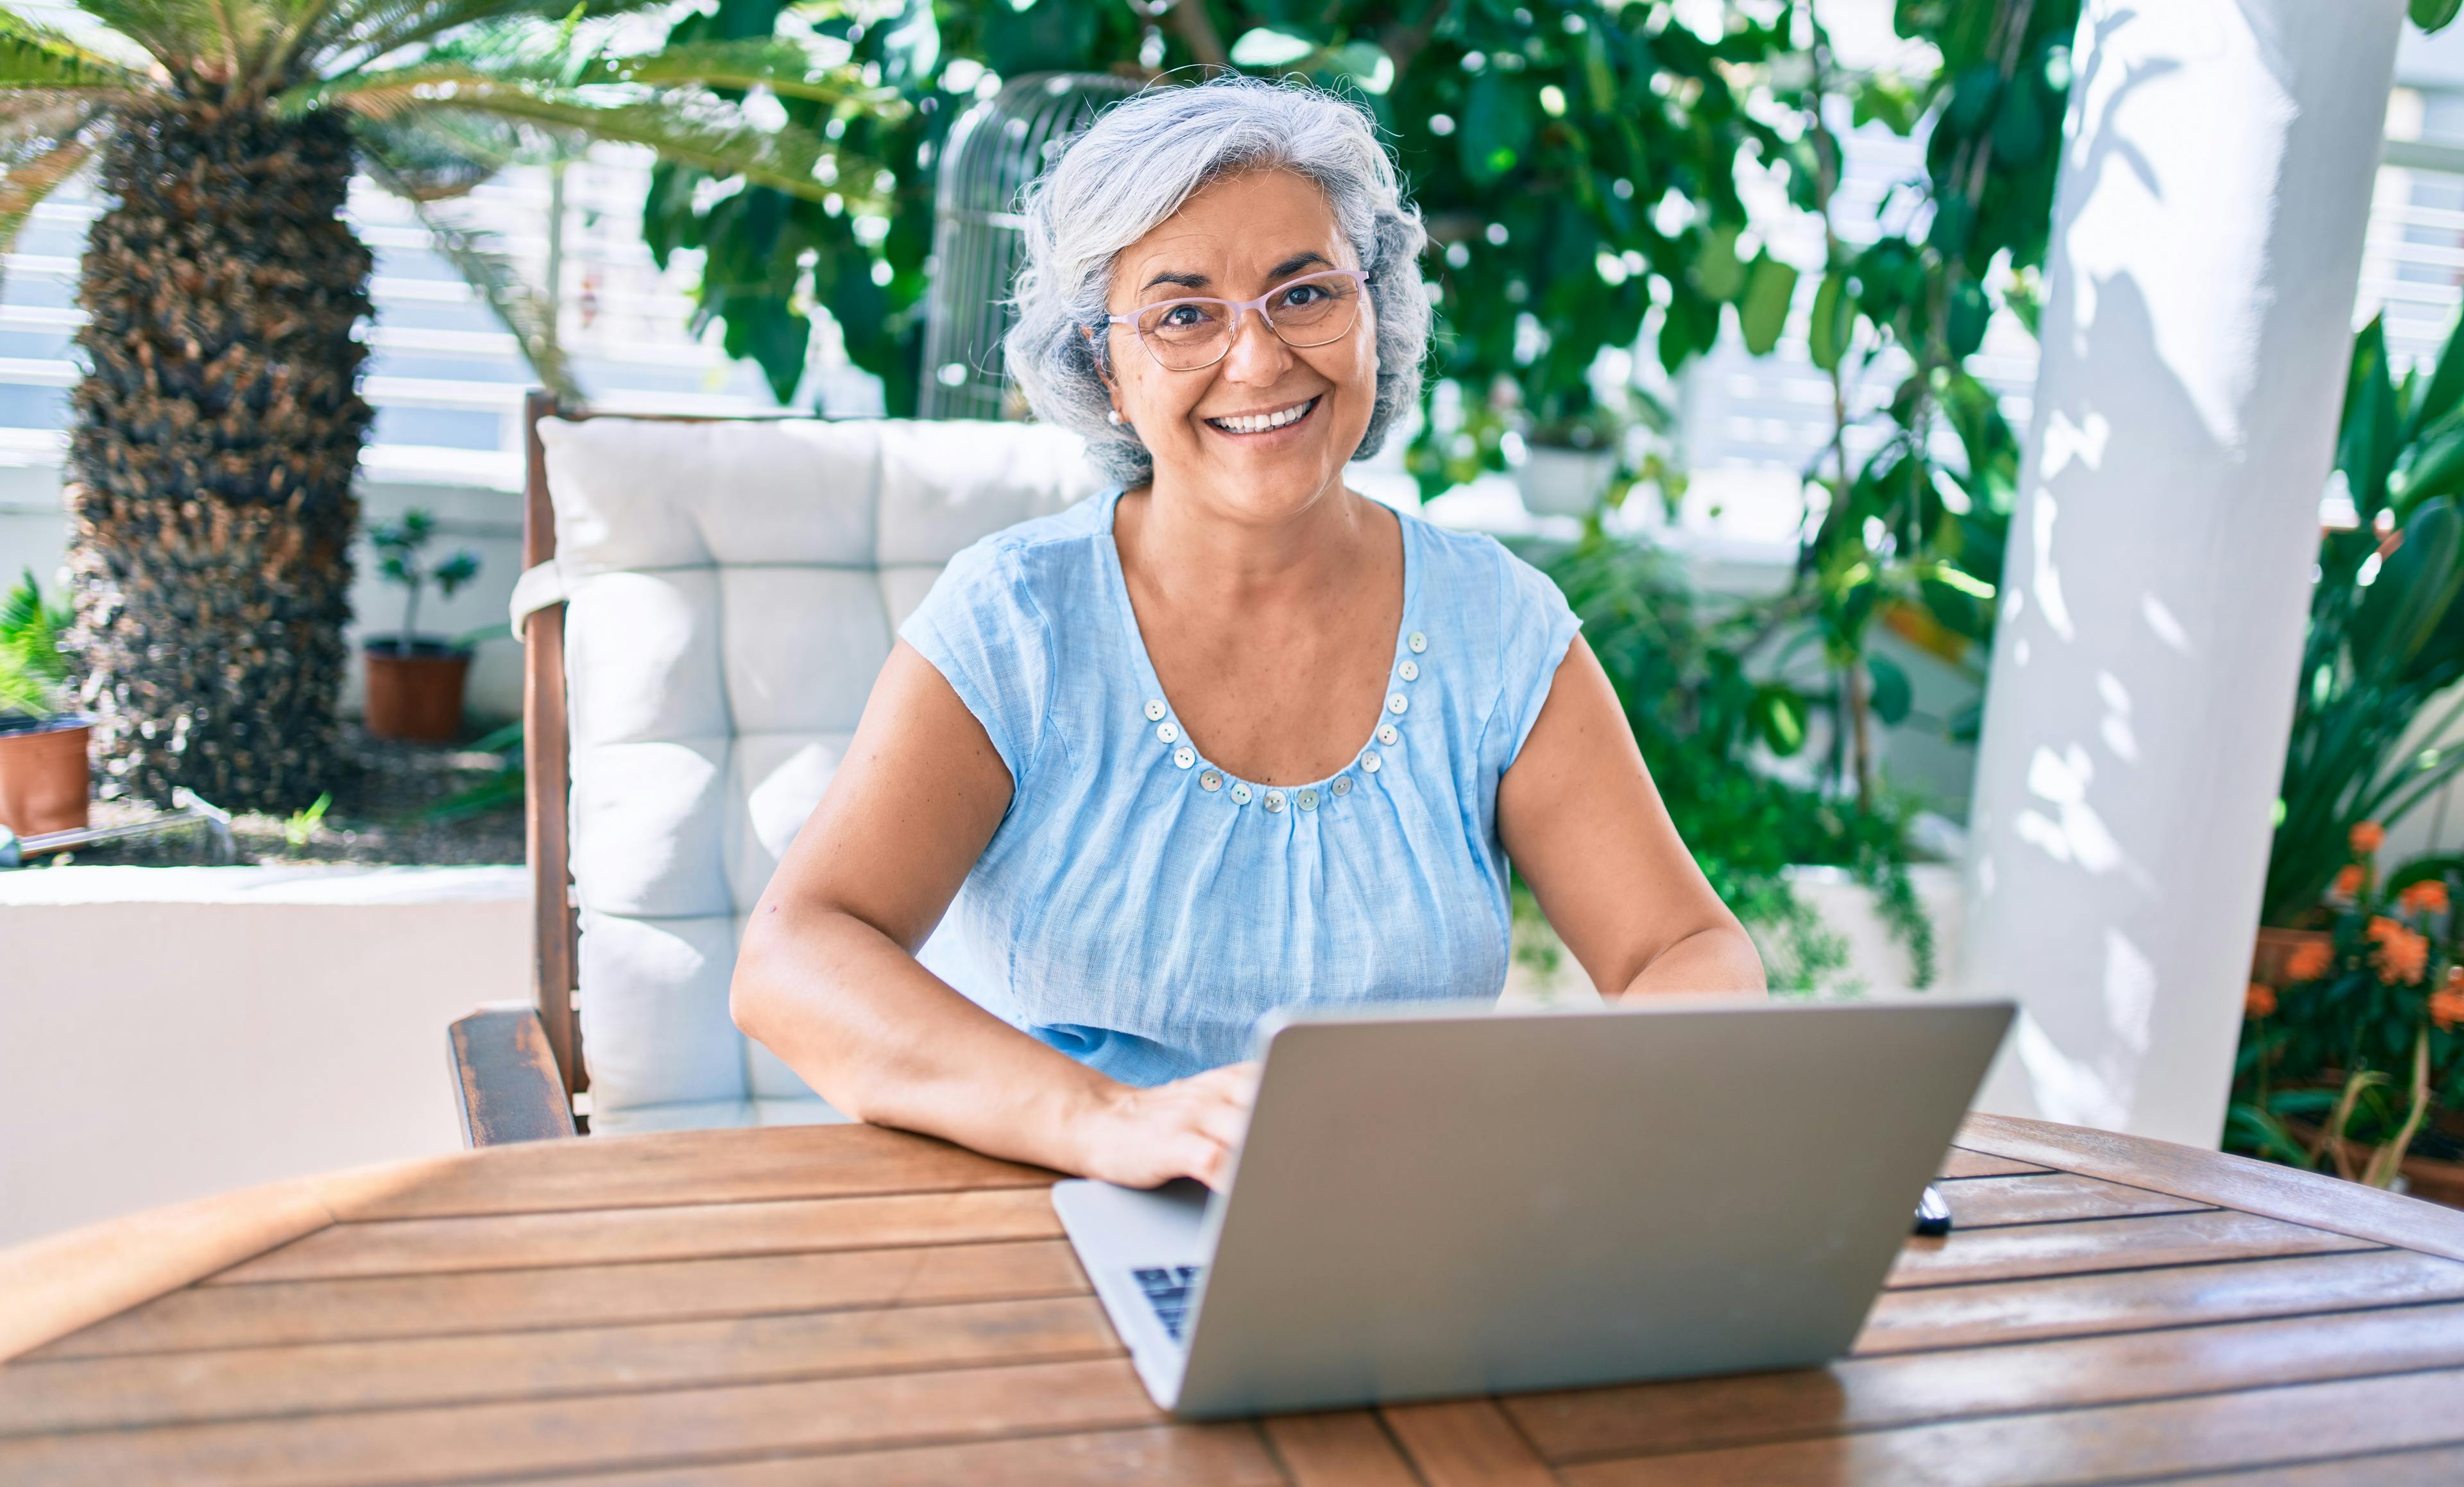 Sometimes cost prevents older adults from getting home internet, but there are several programs that make it affordable. Below are several programs that offer affordable home internet for older adults to help you choose one that best fits you or your loved one’s needs.  